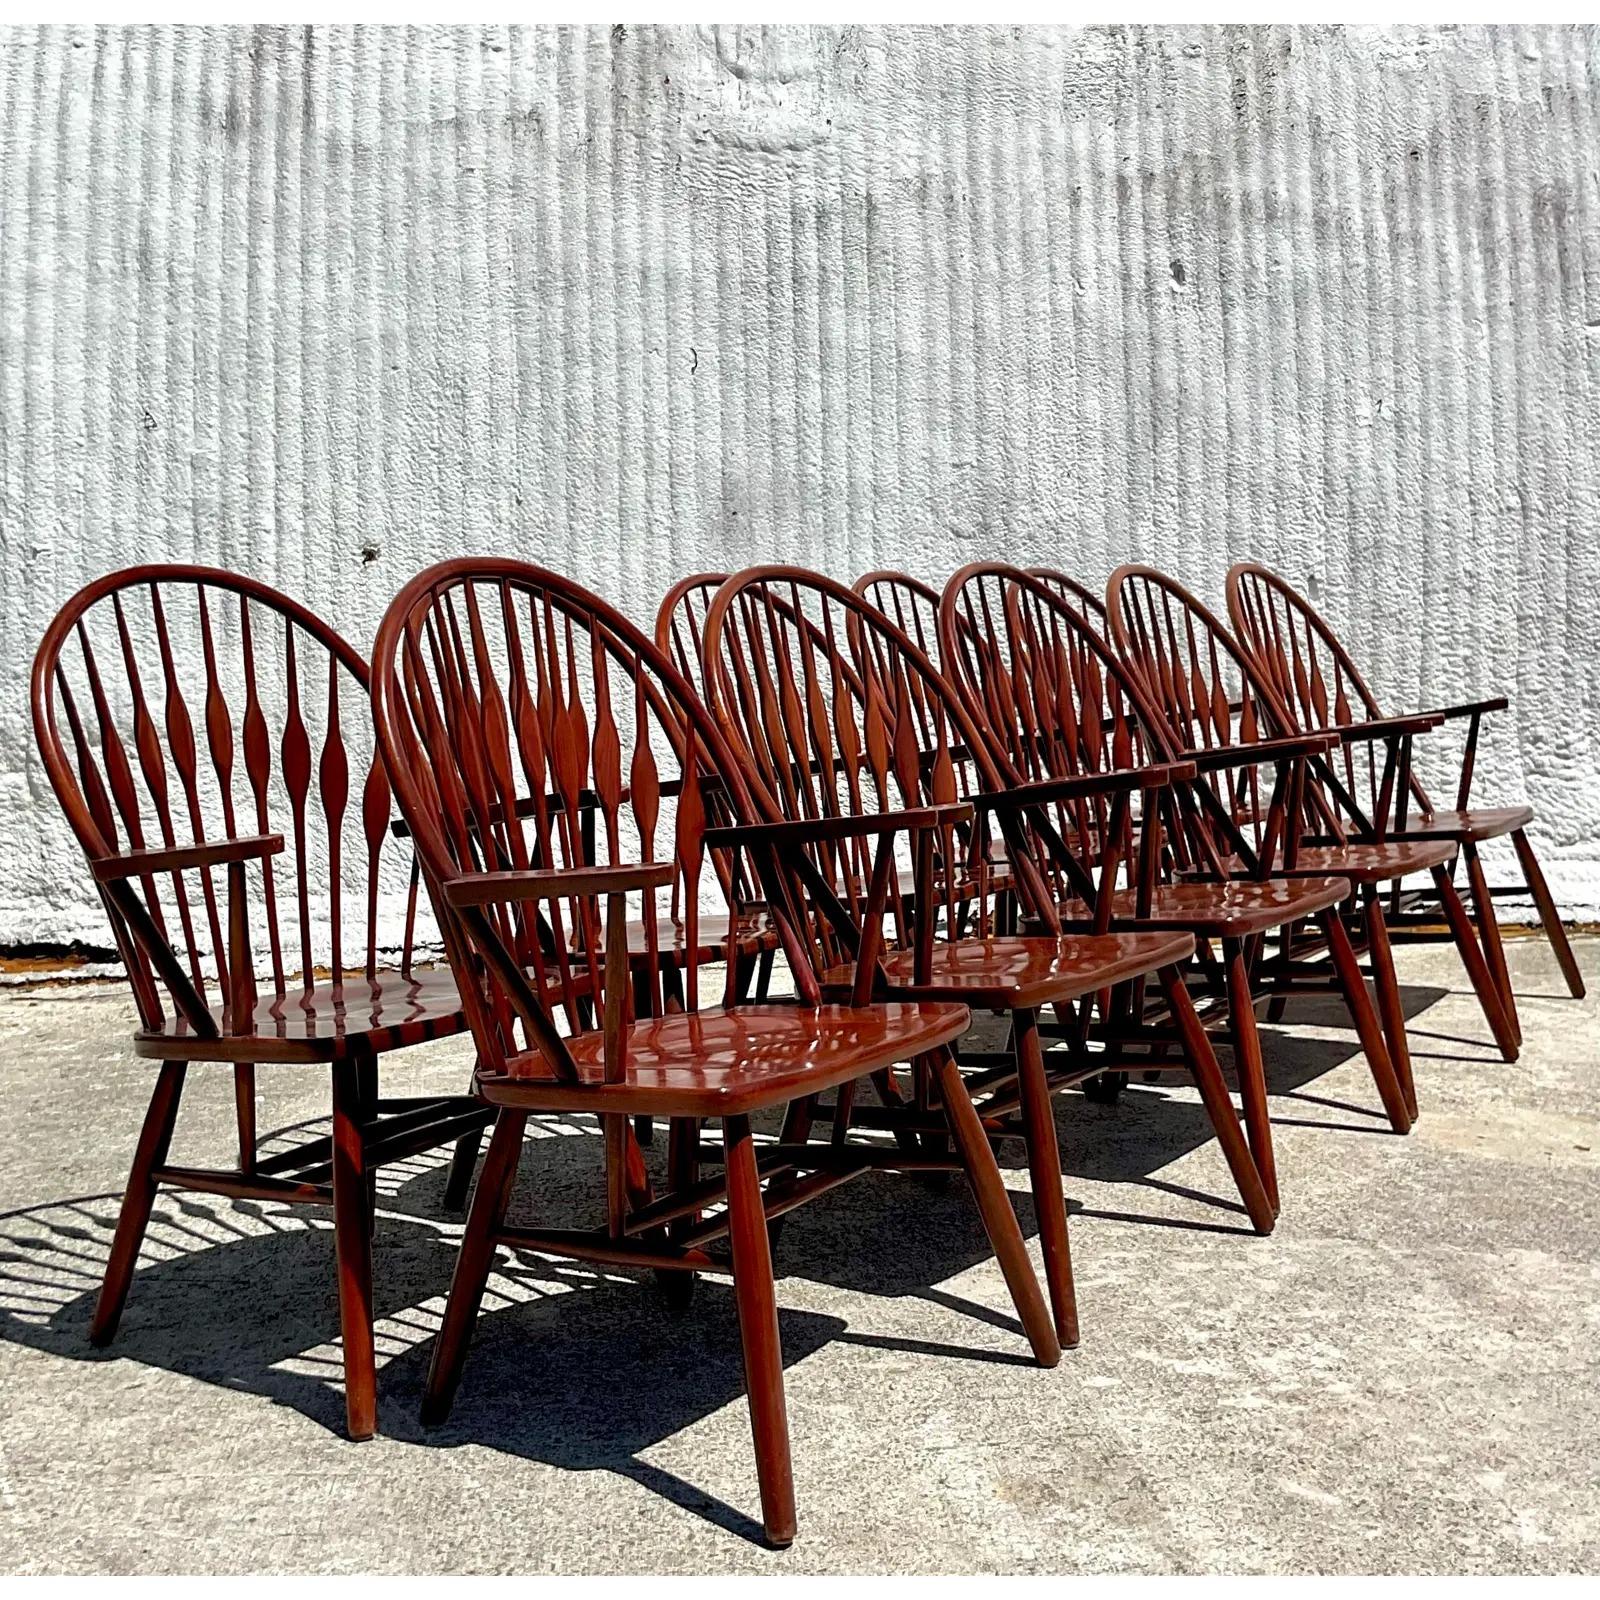 Fabulous set of 10 vintage boho dining chairs. A beautiful Windsor shape with a distinctive paddle back detail. Perfect as in or paint them Matt black for a contemporary farm house look. You decide! Acquired from a Palm Beach estate.